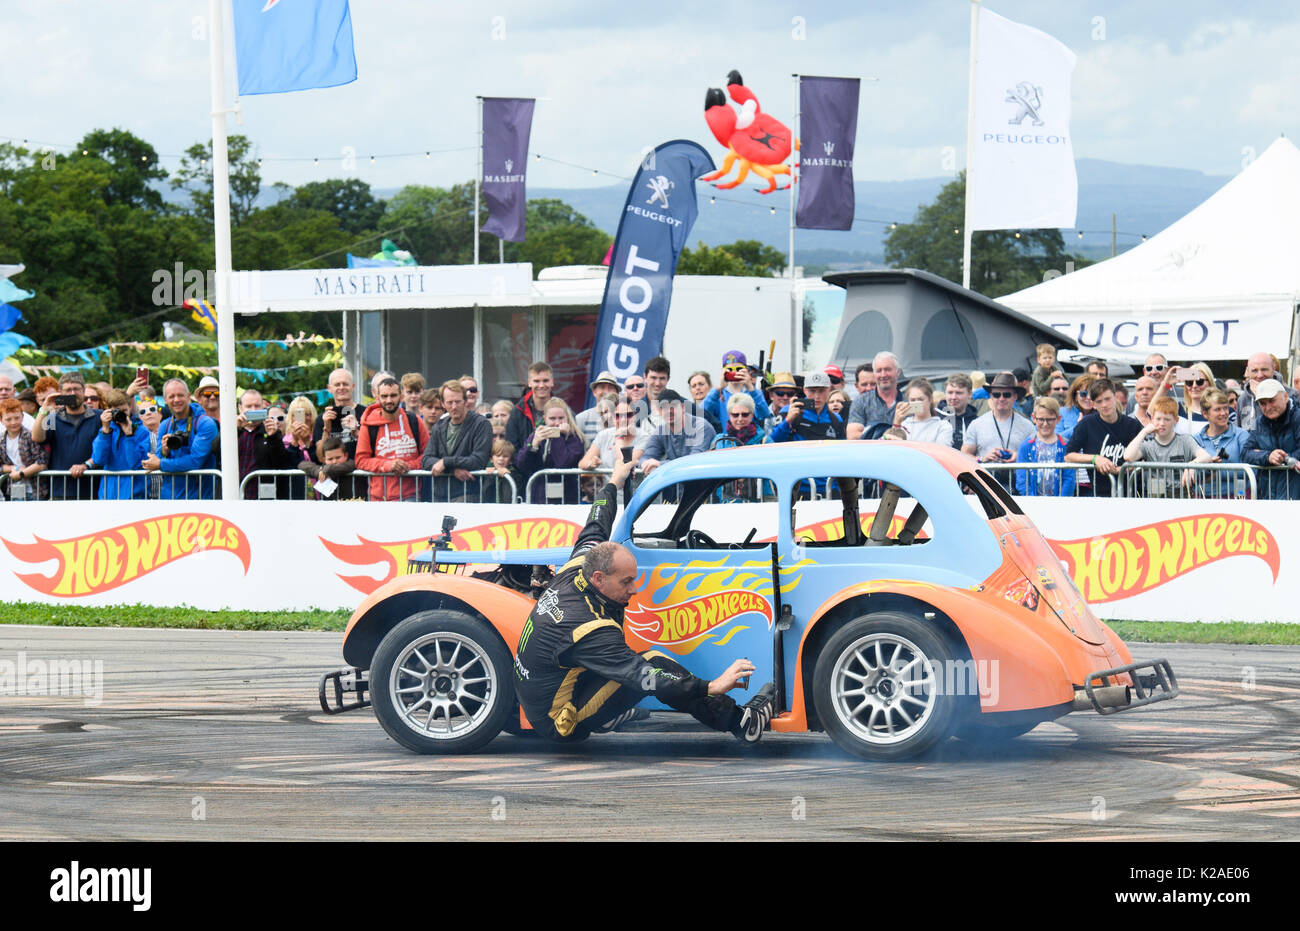 The Hot Wheels Make it Epic Tour races into CarFest North Featuring:  Stuntman Terry Grant completes daring action stunts in a life-size Hot  Wheels car during the parade at CarFest North Where: